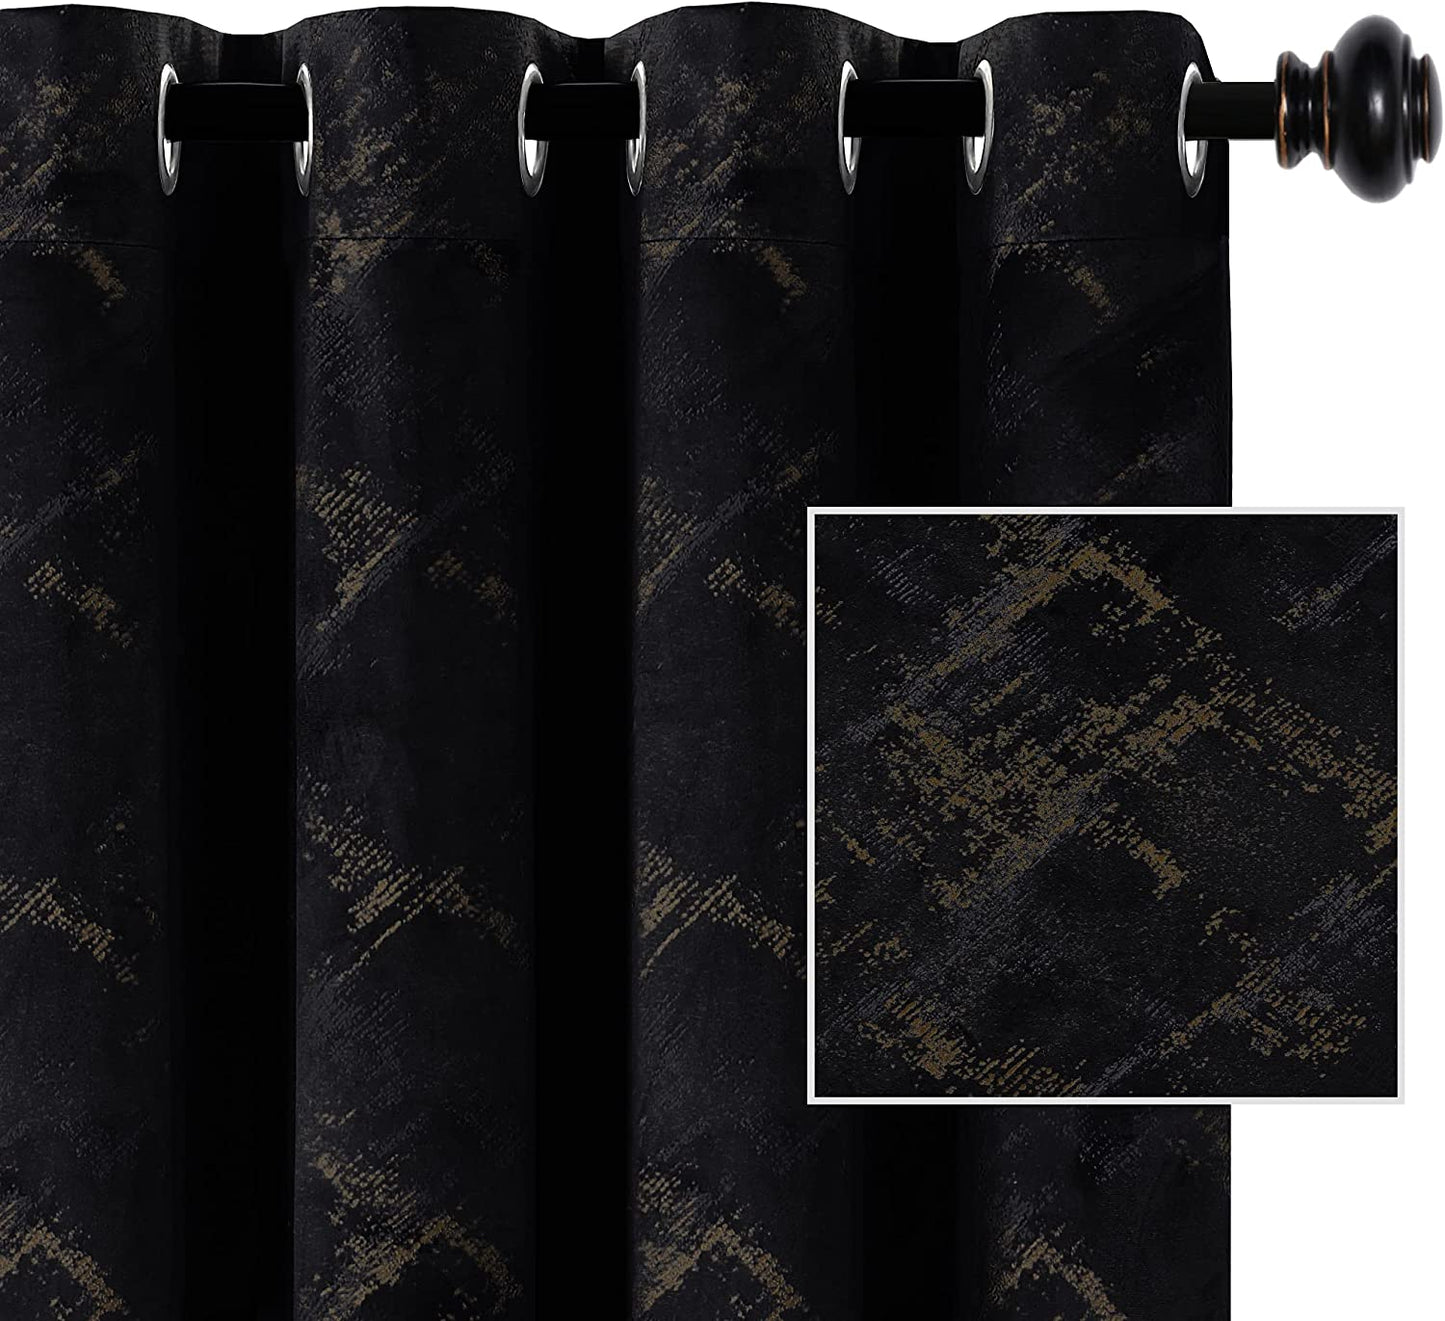 H.VERSAILTEX Luxury Velvet Curtains 84 Inches Long Thermal Insulated Blackout Curtains for Bedroom Foil Print Soft Velvet Grommet Curtain Drapes for Living Room Vintage Home Decor, 2 Panels, Ivory  H.VERSAILTEX Black 52"W X 95"L 